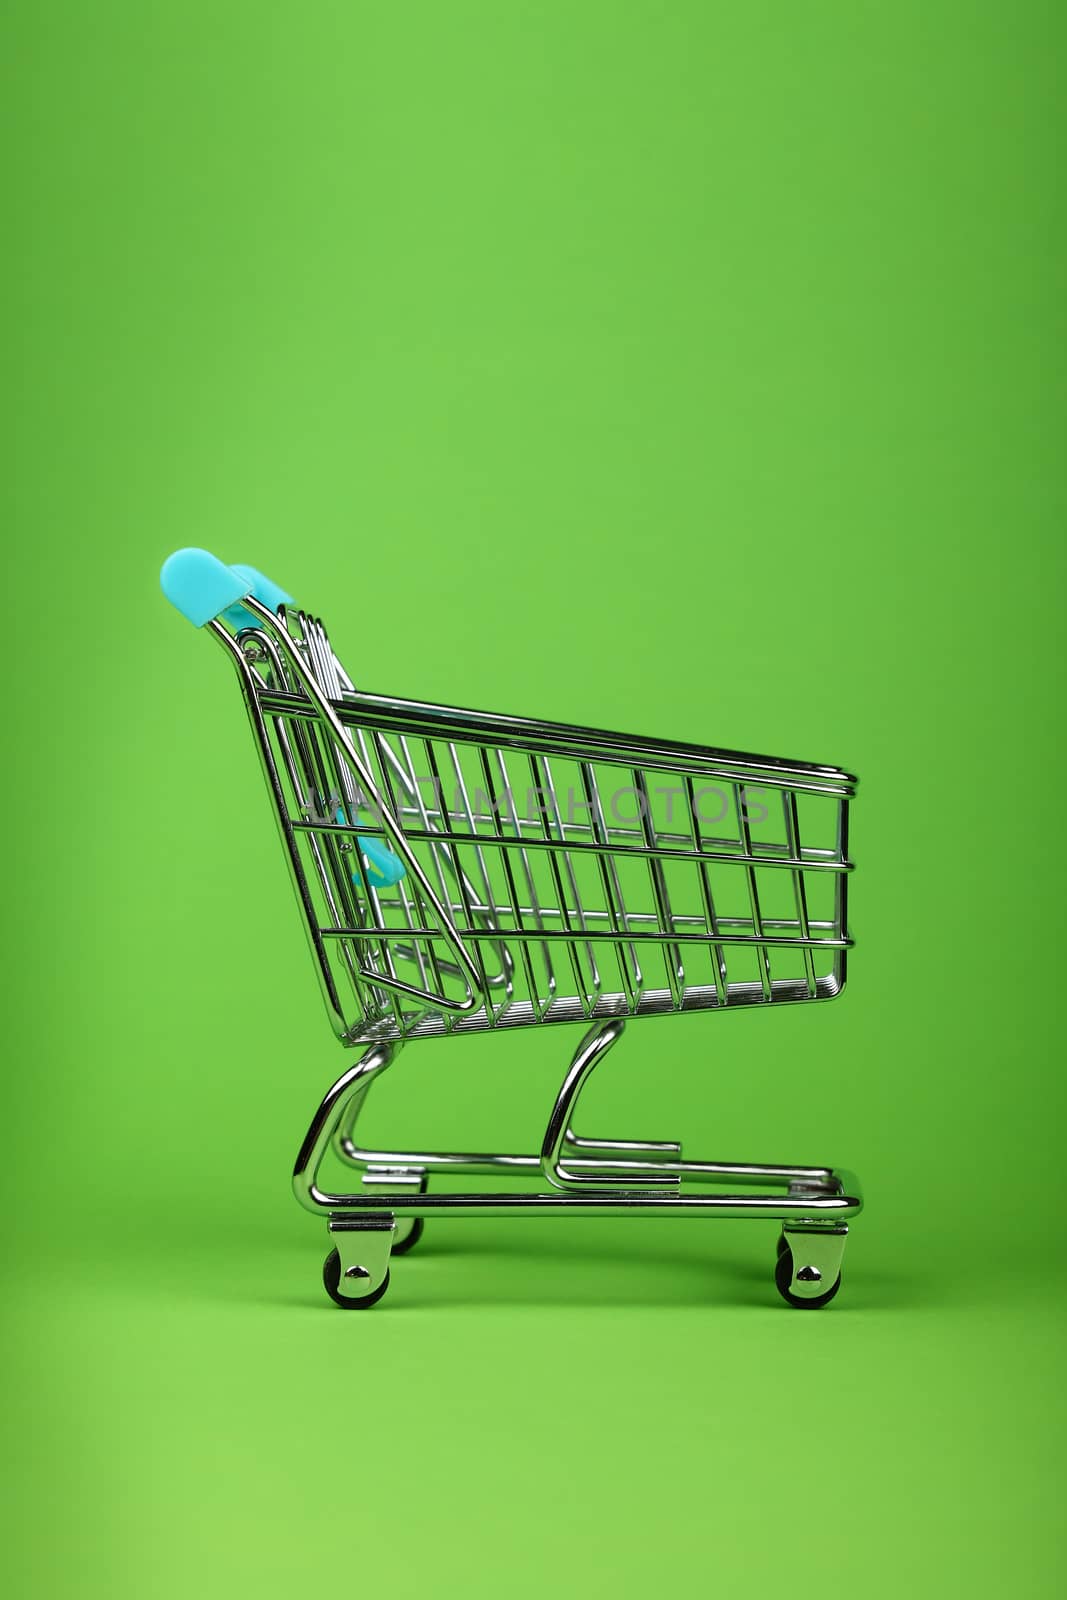 Close up retail shopping cart on green background by BreakingTheWalls